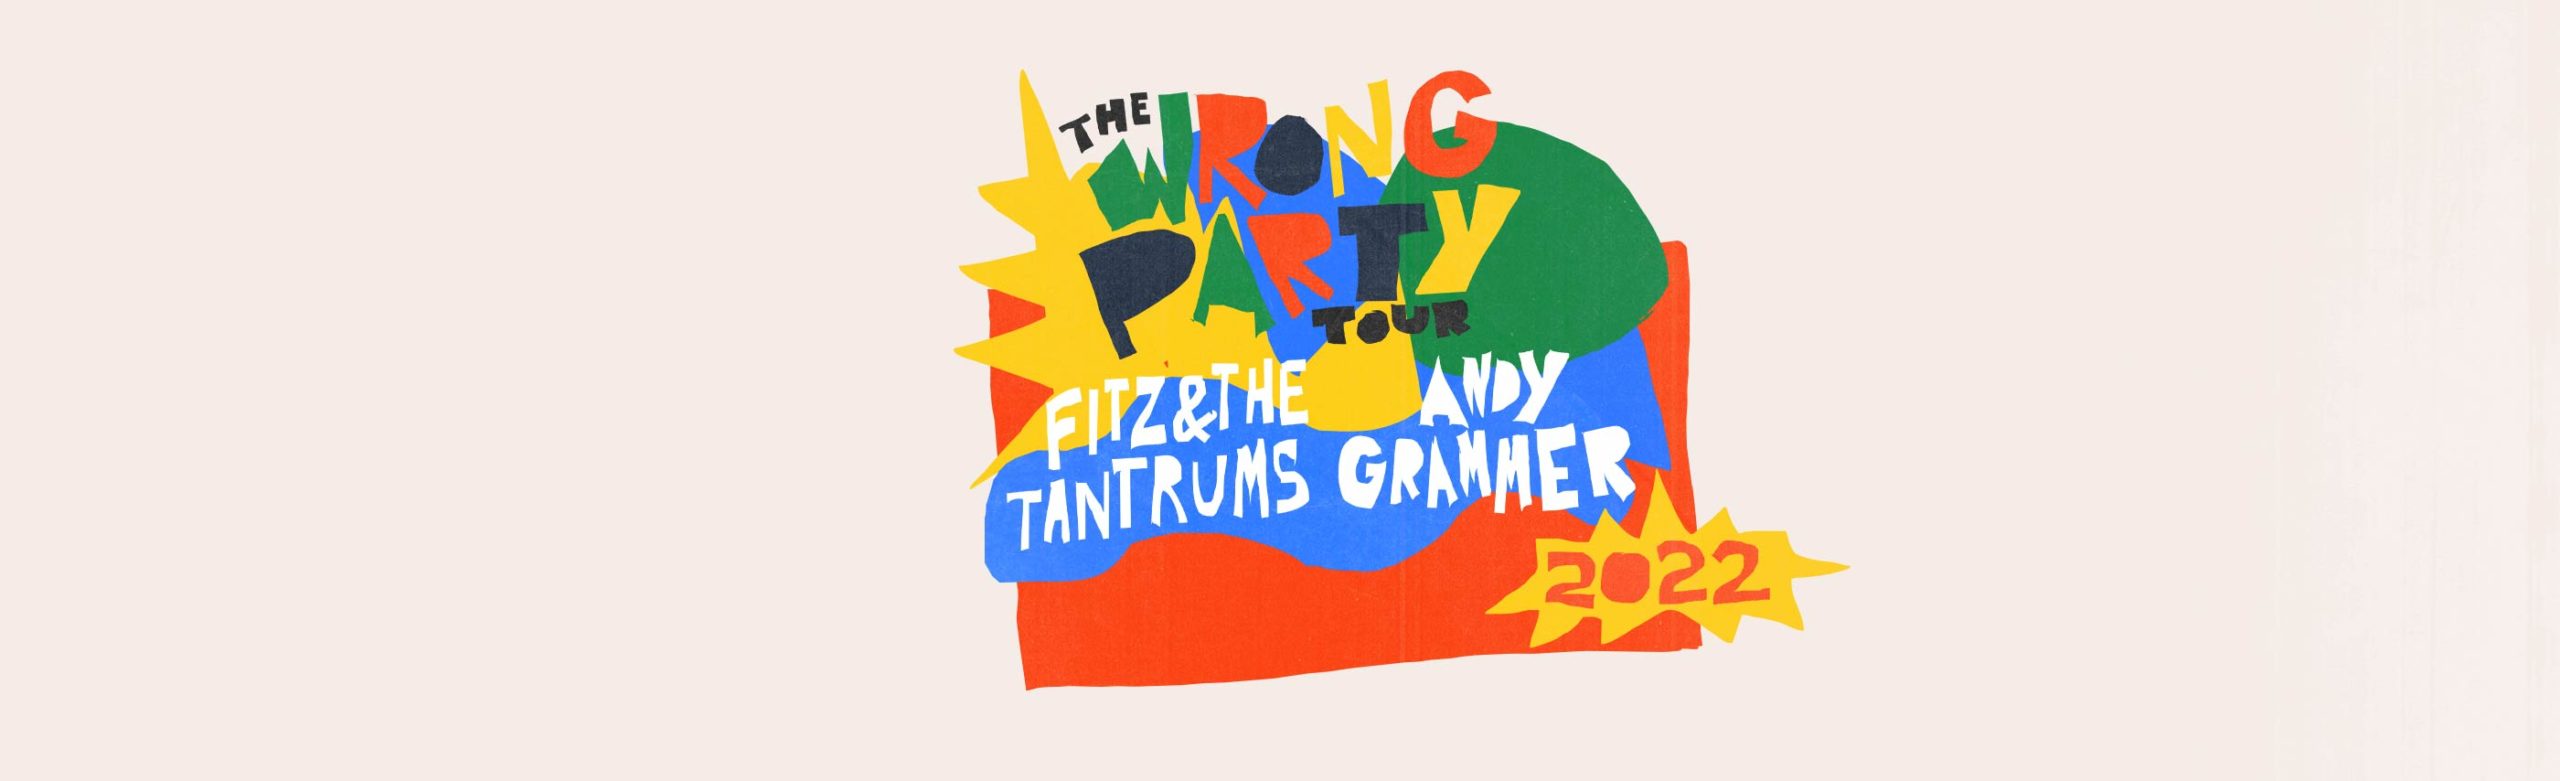 Fitz and the Tantrums + Andy Grammer Tickets Giveaway 2022 Image